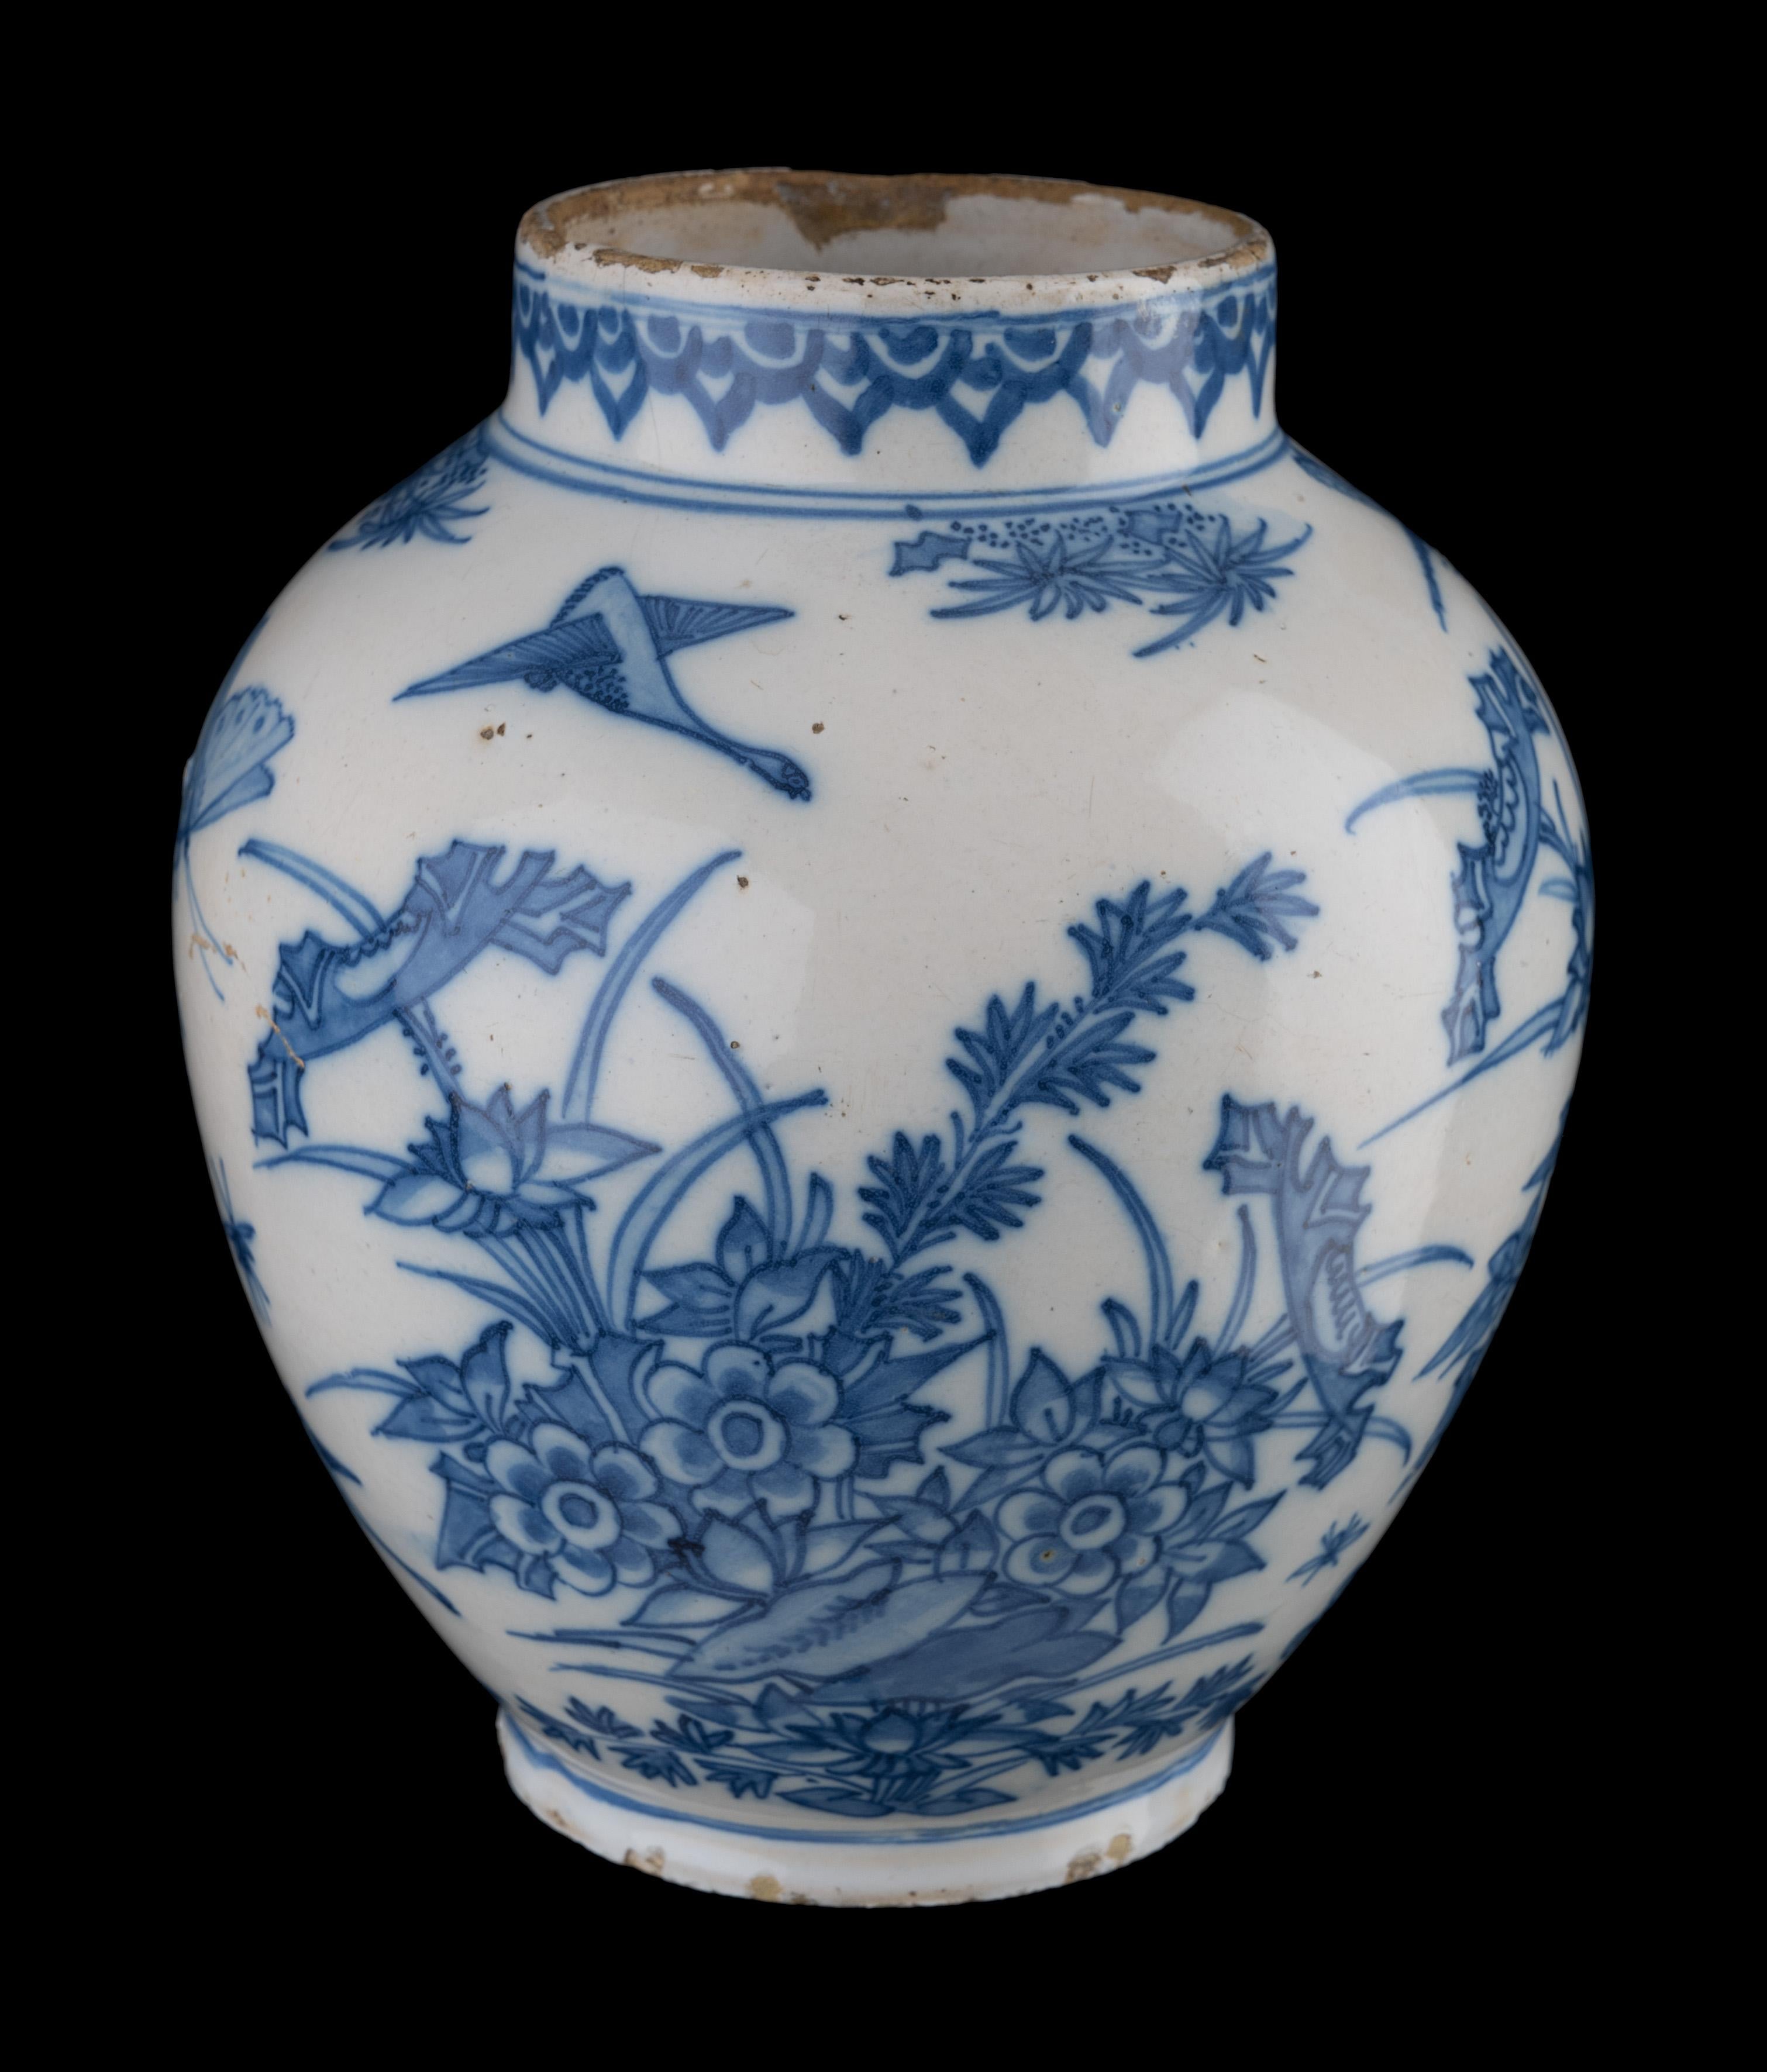 Blue and white floral chinoiserie jar. Delft, 1650-1680

The ovoid jar has a lightly spreading foot and a short, straight upright neck. The jar is painted in blue with a continuous floral decor of plants and flowers. Birds, butterflies, dragonflies